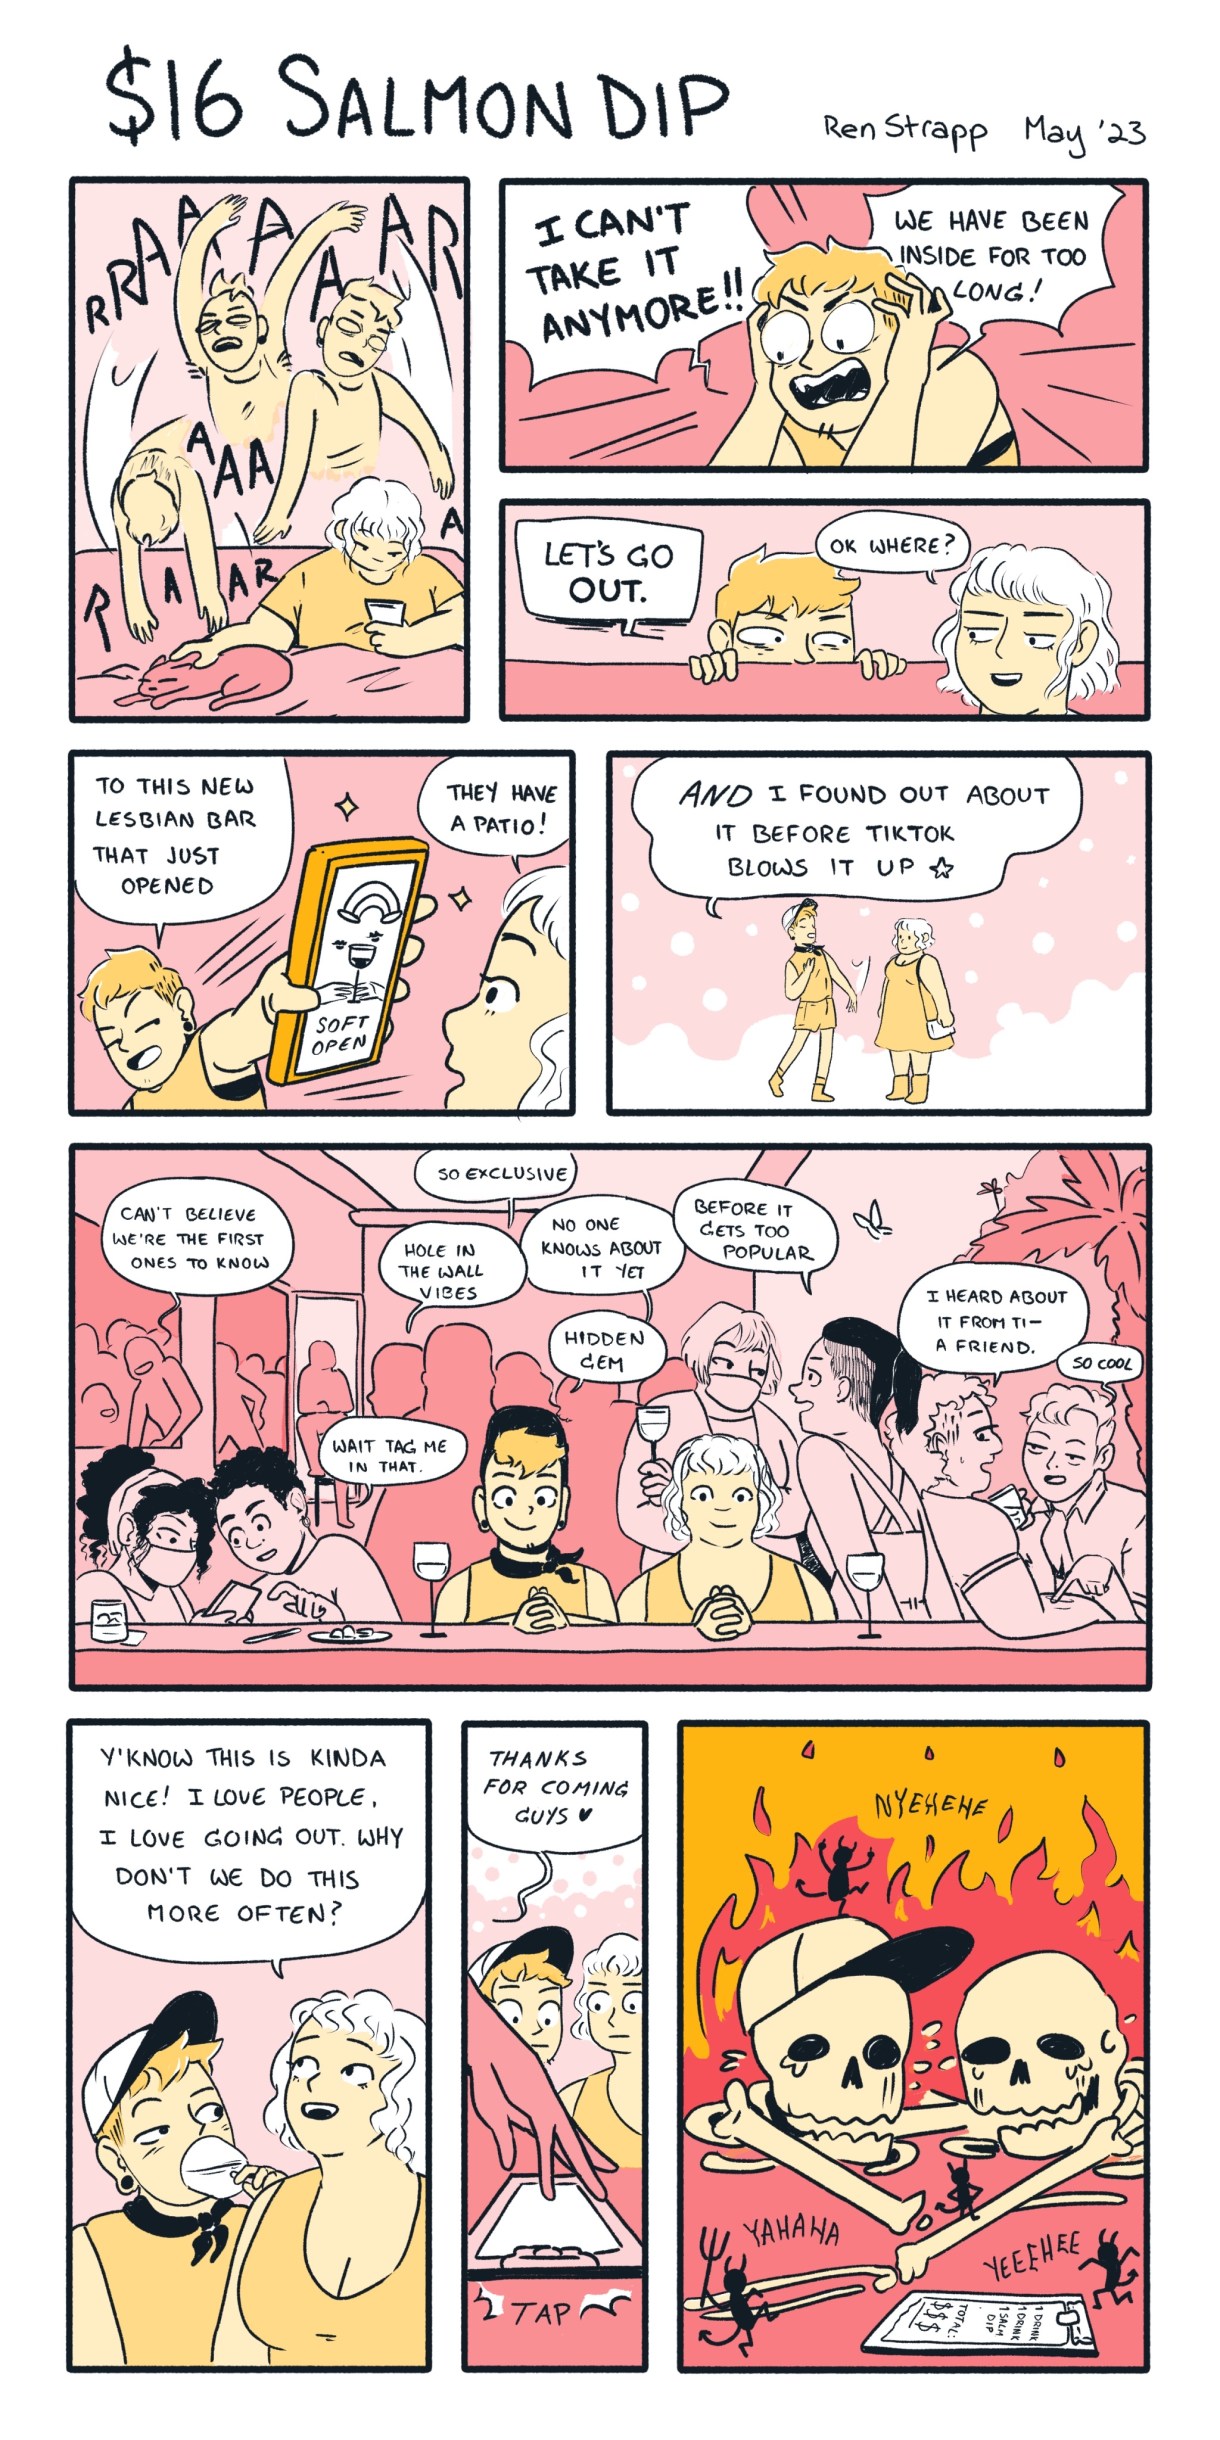 Yellow and pink nine panel comic, in which a queer person has spent too much time inside and screams I CANT TAKE IT ANYMORE!!! So their friend suggests "Lets Go Out." They found a new lesbian bar with an outdoor patio that hasn't been ruined by TikTok yet. They get excited to go and even say "You know, this is kinda nice! I love people. I love going out. Why don't we do this more often?" Then they get the bill, and it's so expensive that both friends promptly turn into skeletons surrounded by fire.